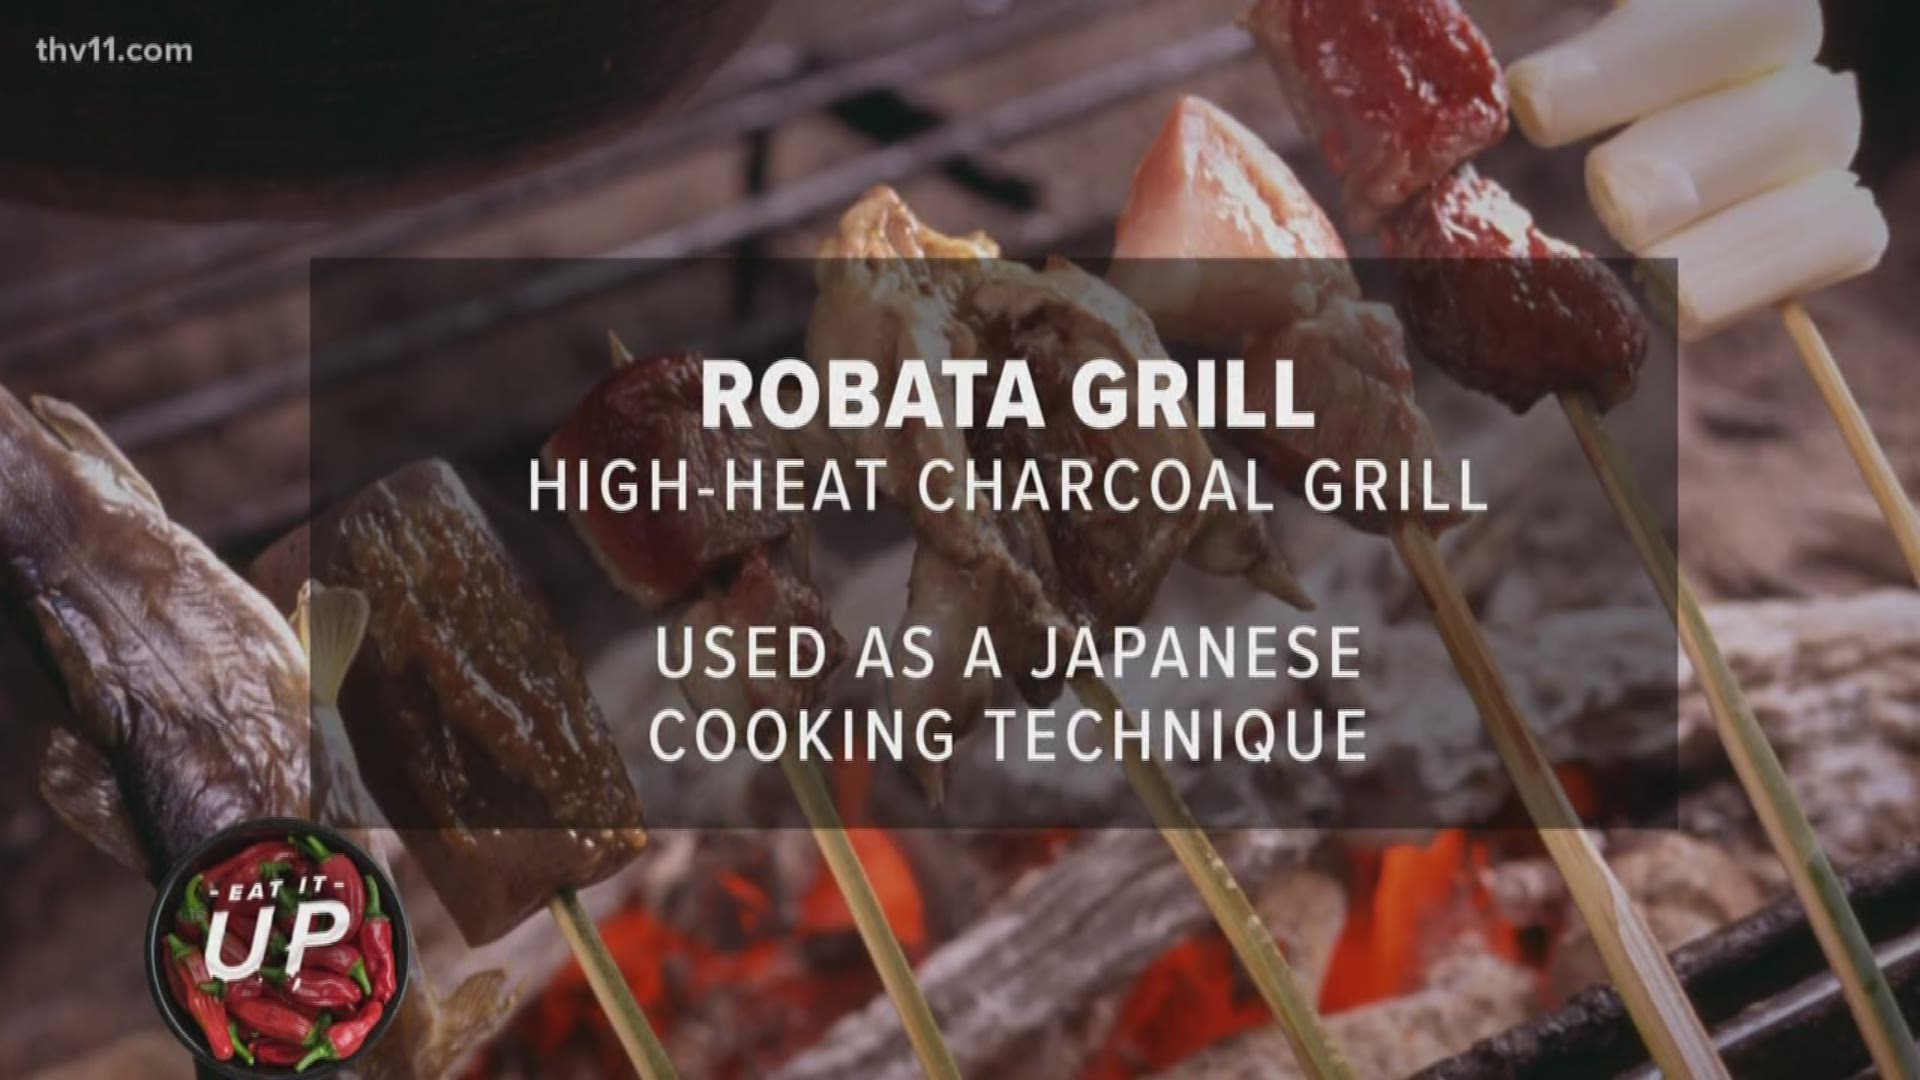 Kemuri is a delicious Japanese restaurant that uses a robata grill.